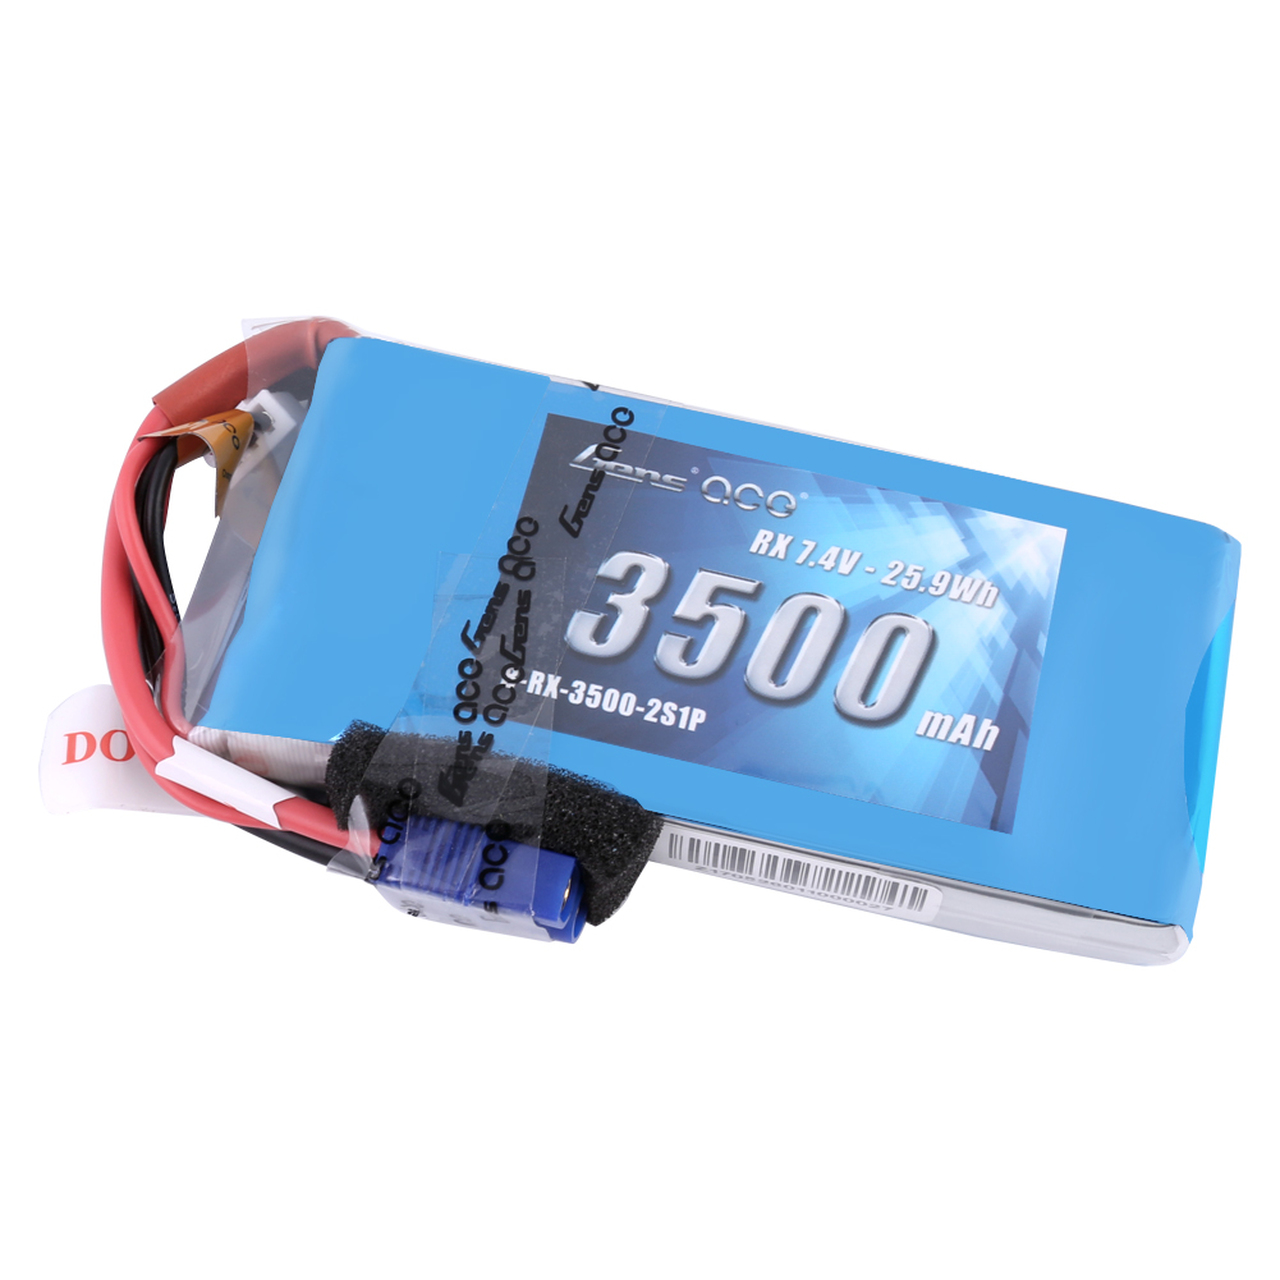 Gens ace 3500mAh 2S 7.4V RX Lipo Battery Pack with JR and EC3 Plug